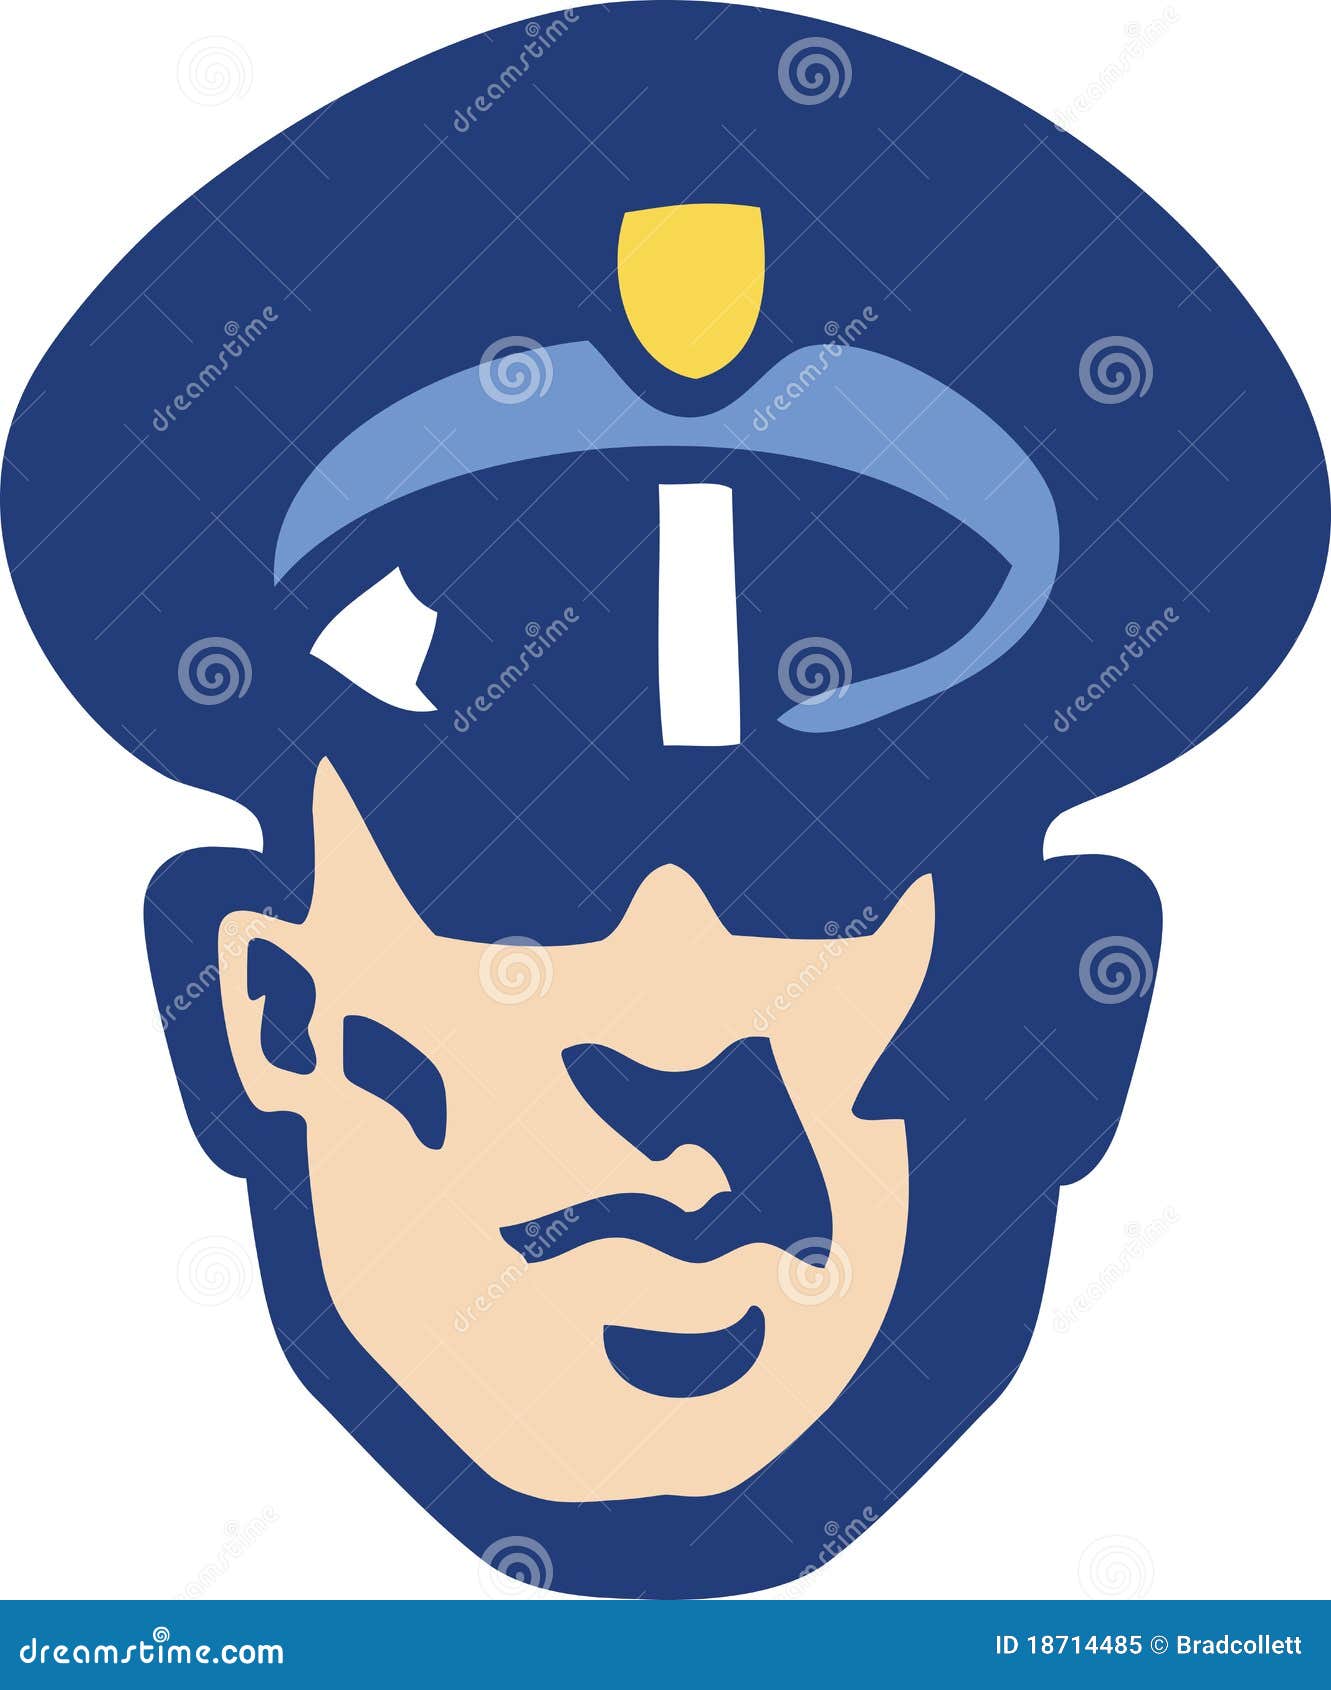 physical security clipart - photo #14